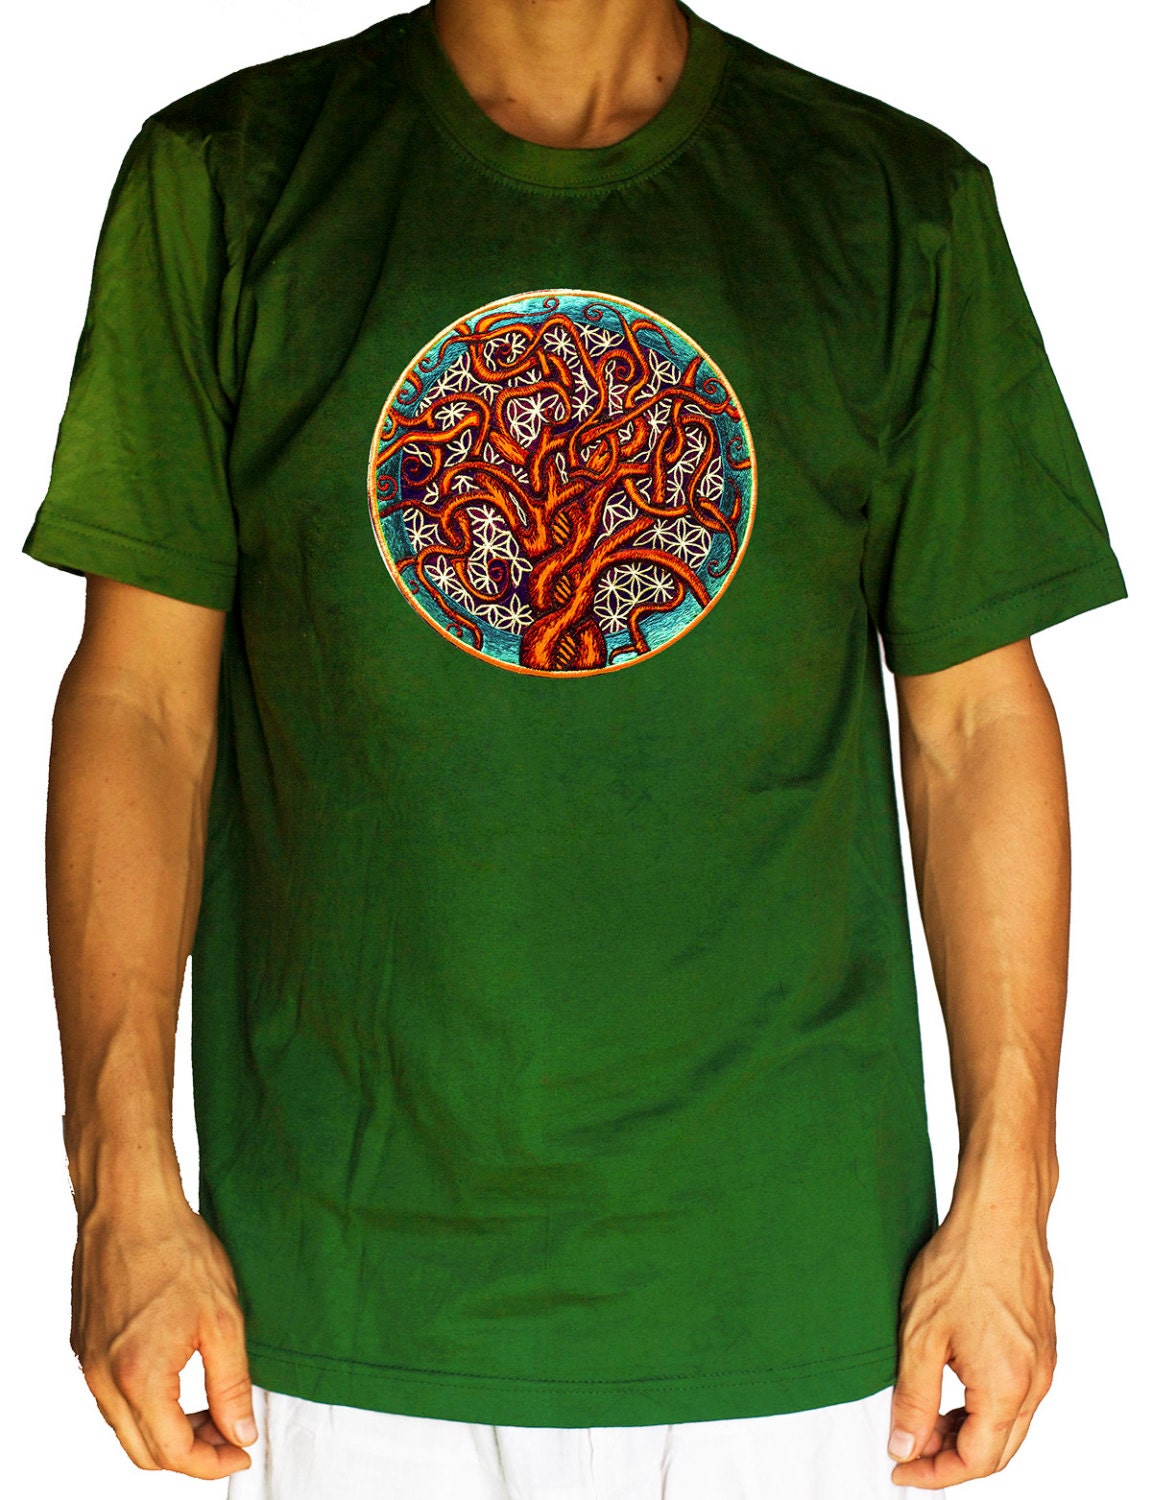 Tree of Life shirt flower of life - sacred geometry embroidery no print drunvalo melchizedek handmade - choose any colour and size